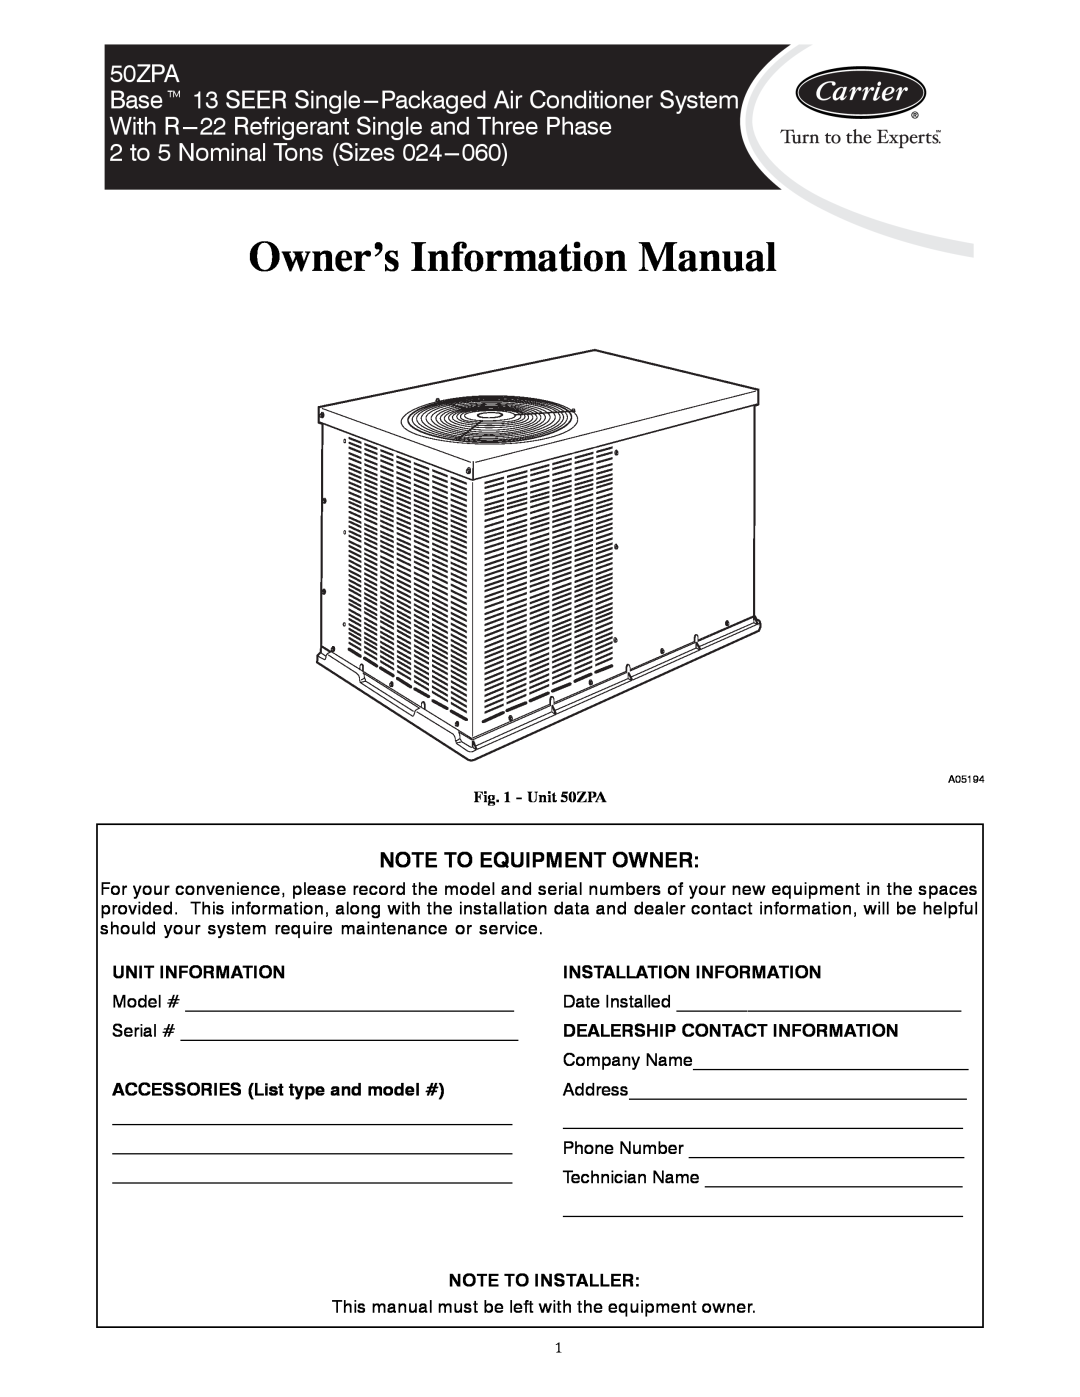 Carrier 50ZPA manual Owner’s Information Manual, 2 to 5 Nominal Tons Sizes, Note To Equipment Owner, Unit Information 